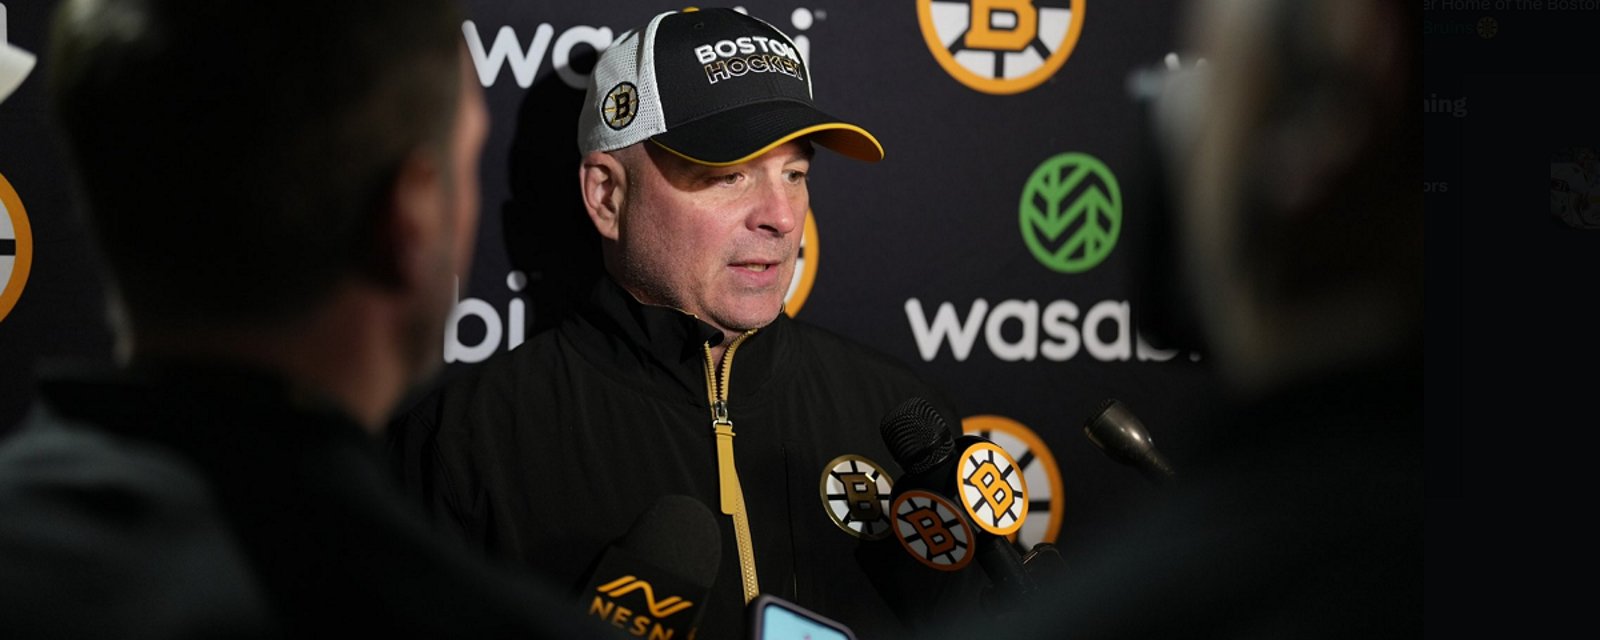 Jim Montgomery responds to being booed by fans on home ice.